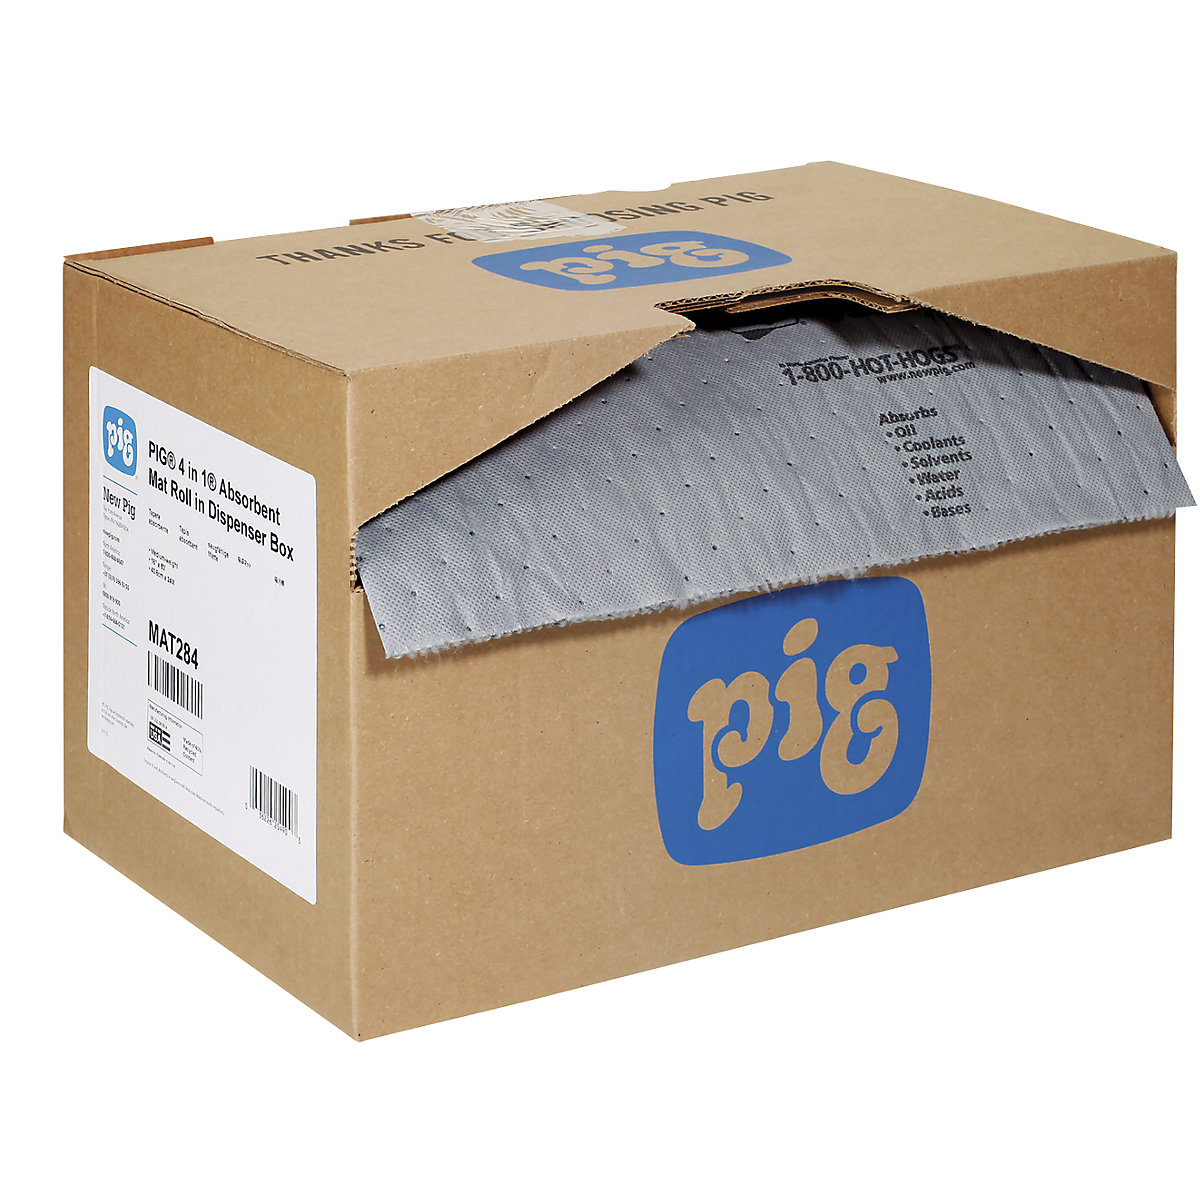 Rolo absorvente universal 4-in-1® - PIG